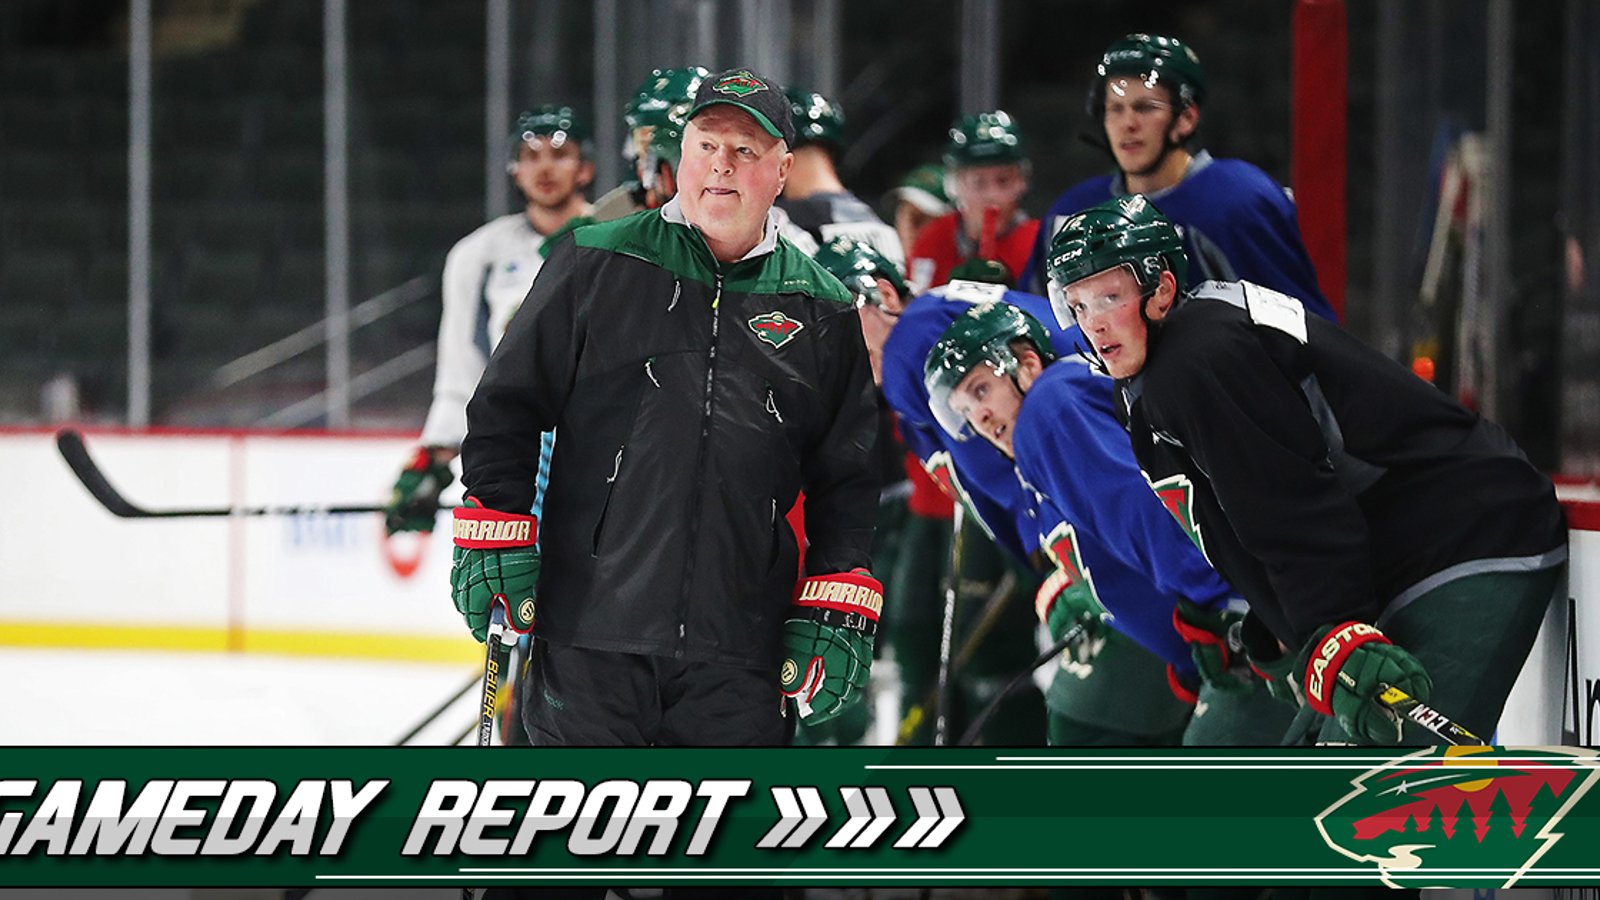 Bruce Boudreau has a new strategy to jump back in the victory train.